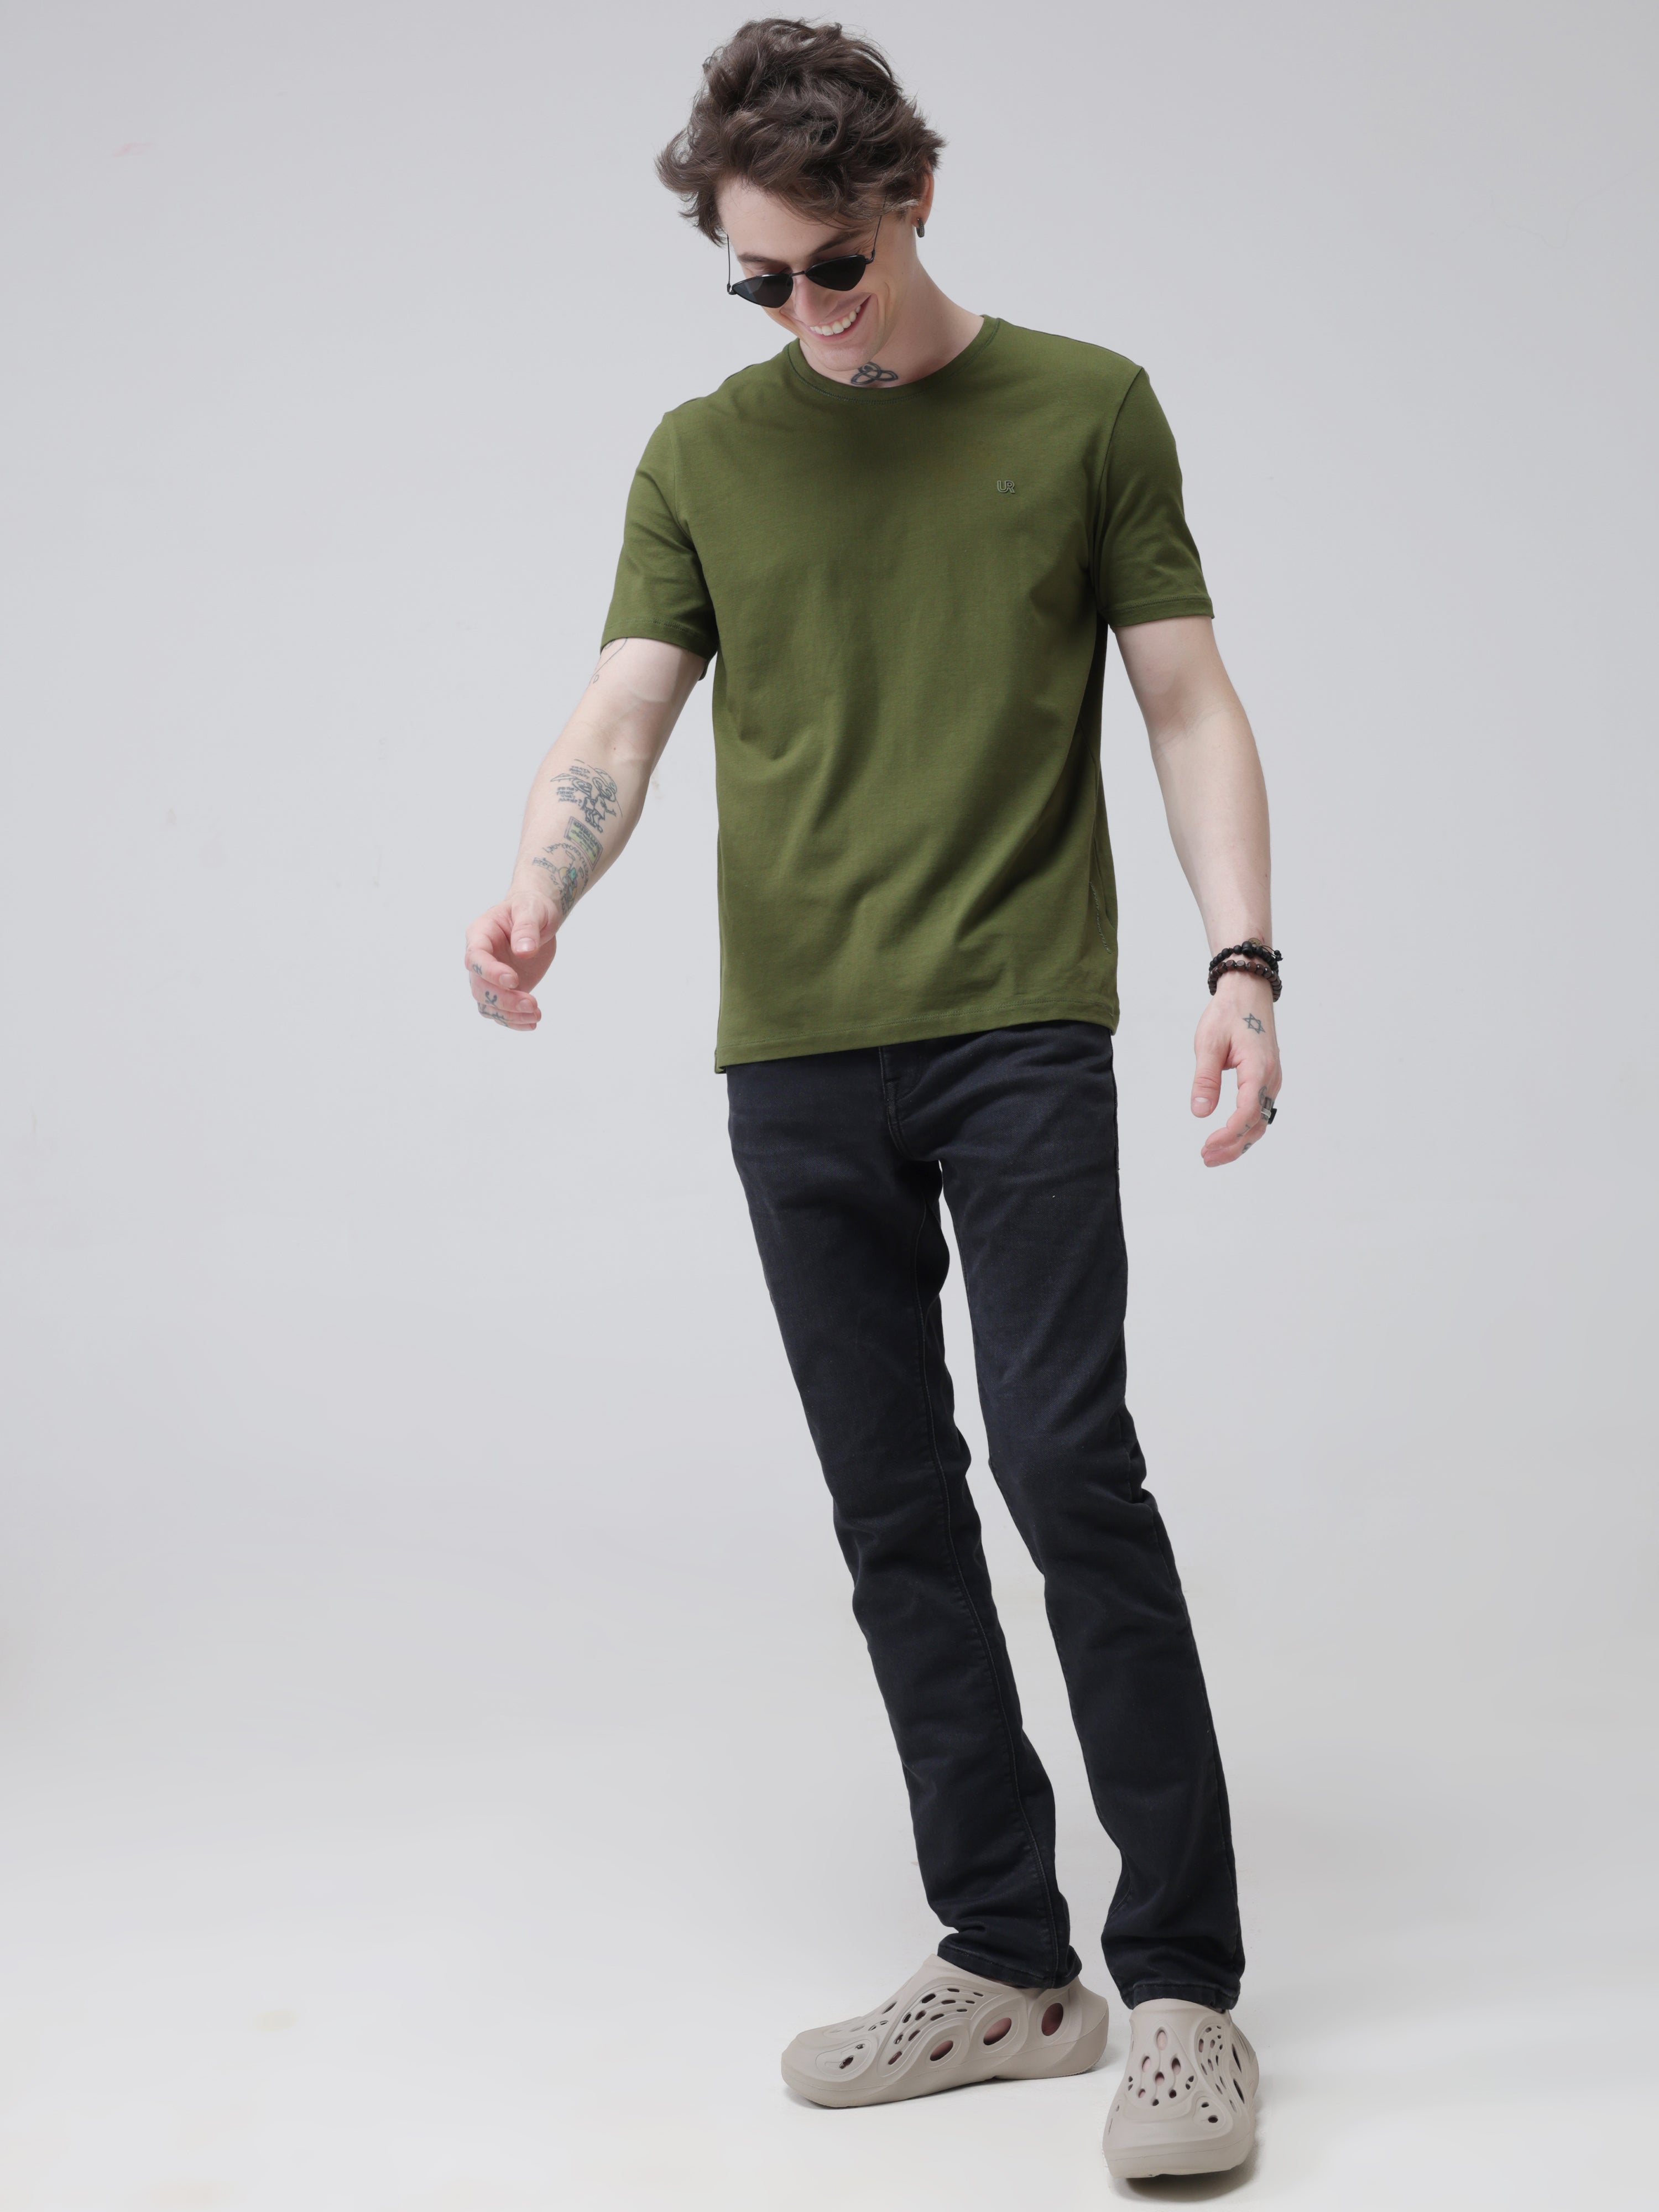 Man wearing green Turms round-neck t-shirt and black jeans, showcasing water-resistant and anti-stain menswear.